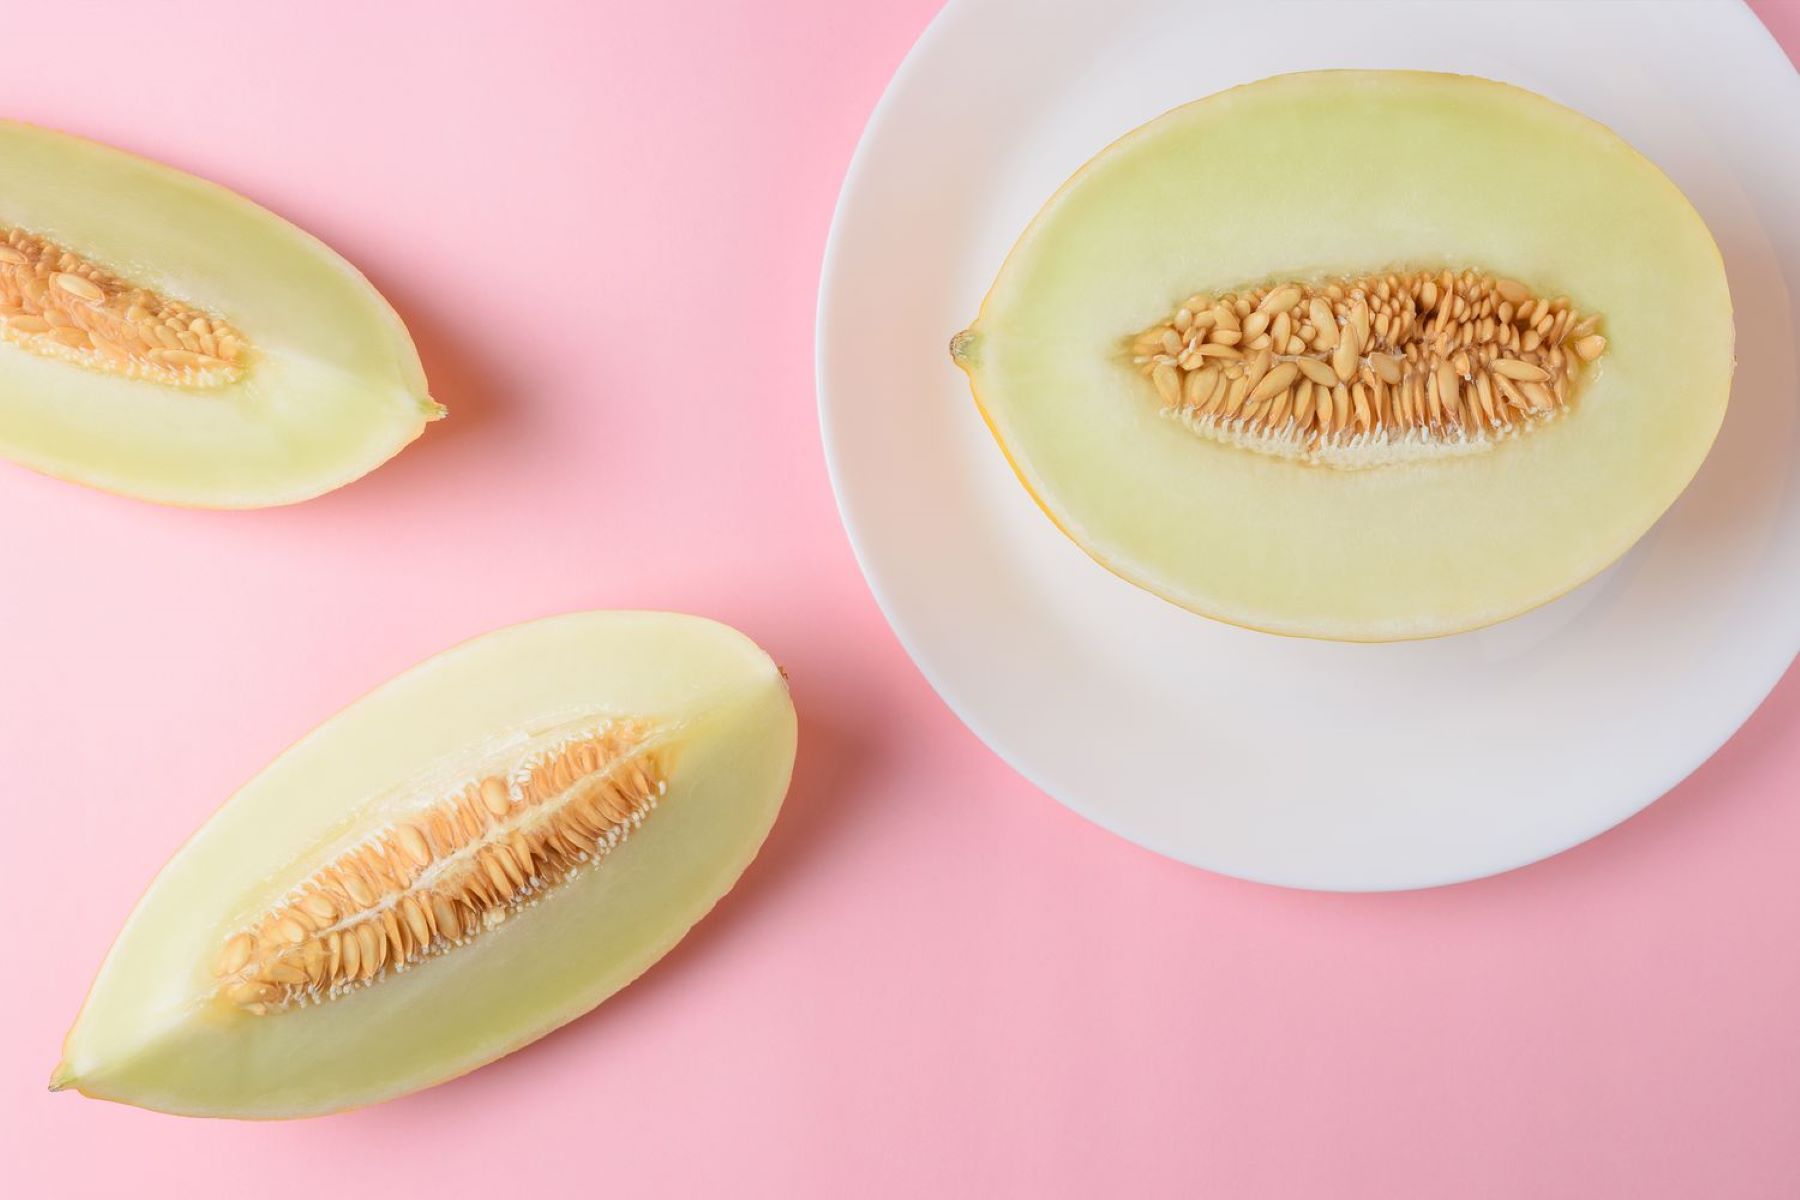 How To Store Honeydew Melon